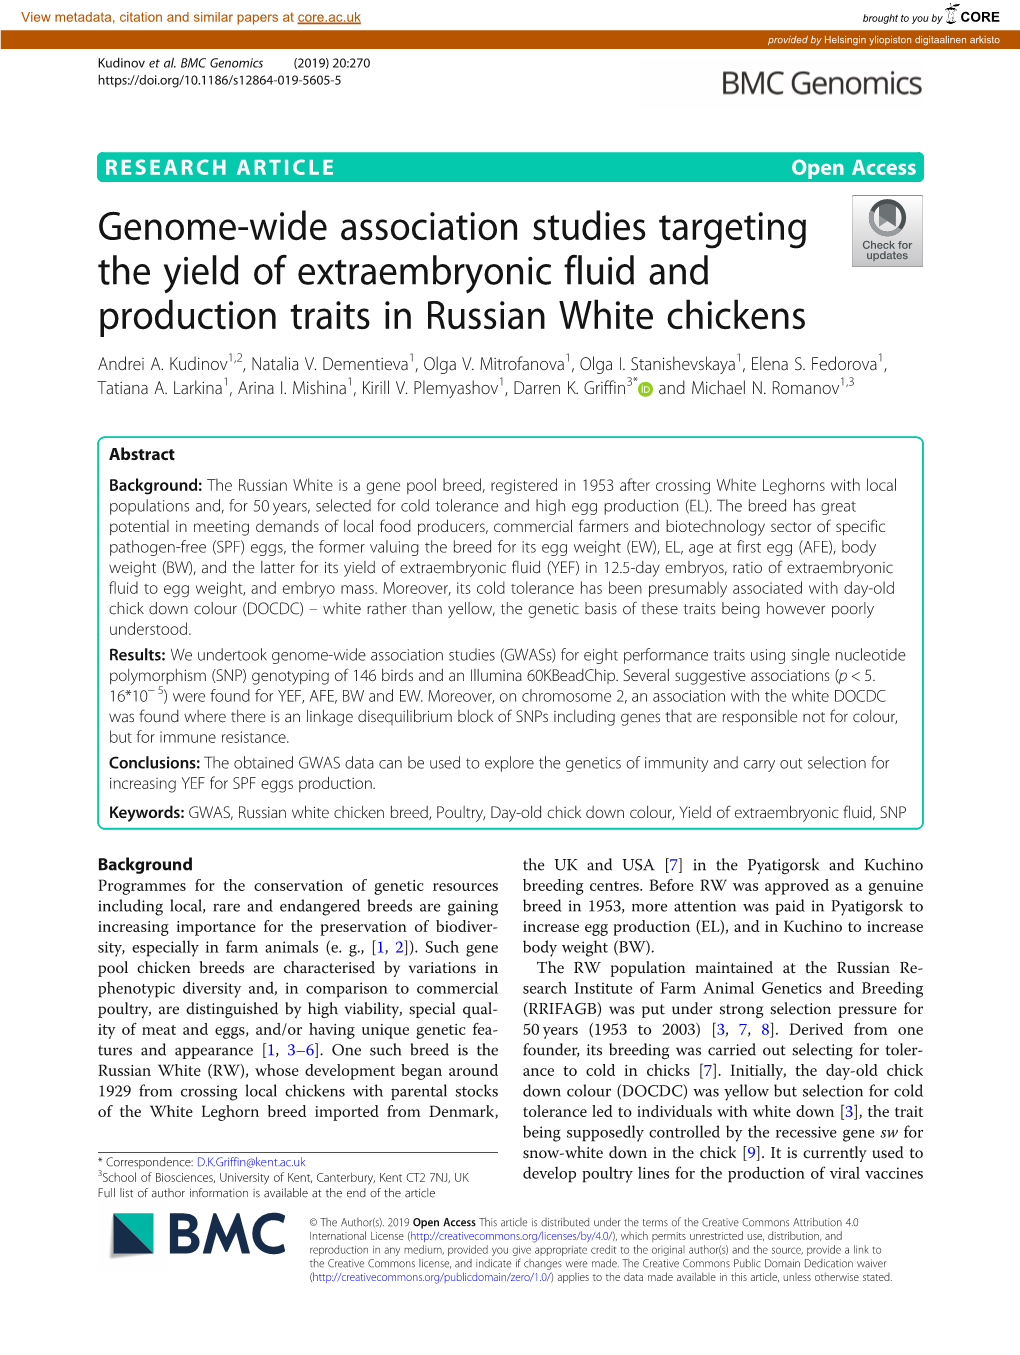 Genome-Wide Association Studies Targeting the Yield of Extraembryonic Fluid and Production Traits in Russian White Chickens Andrei A